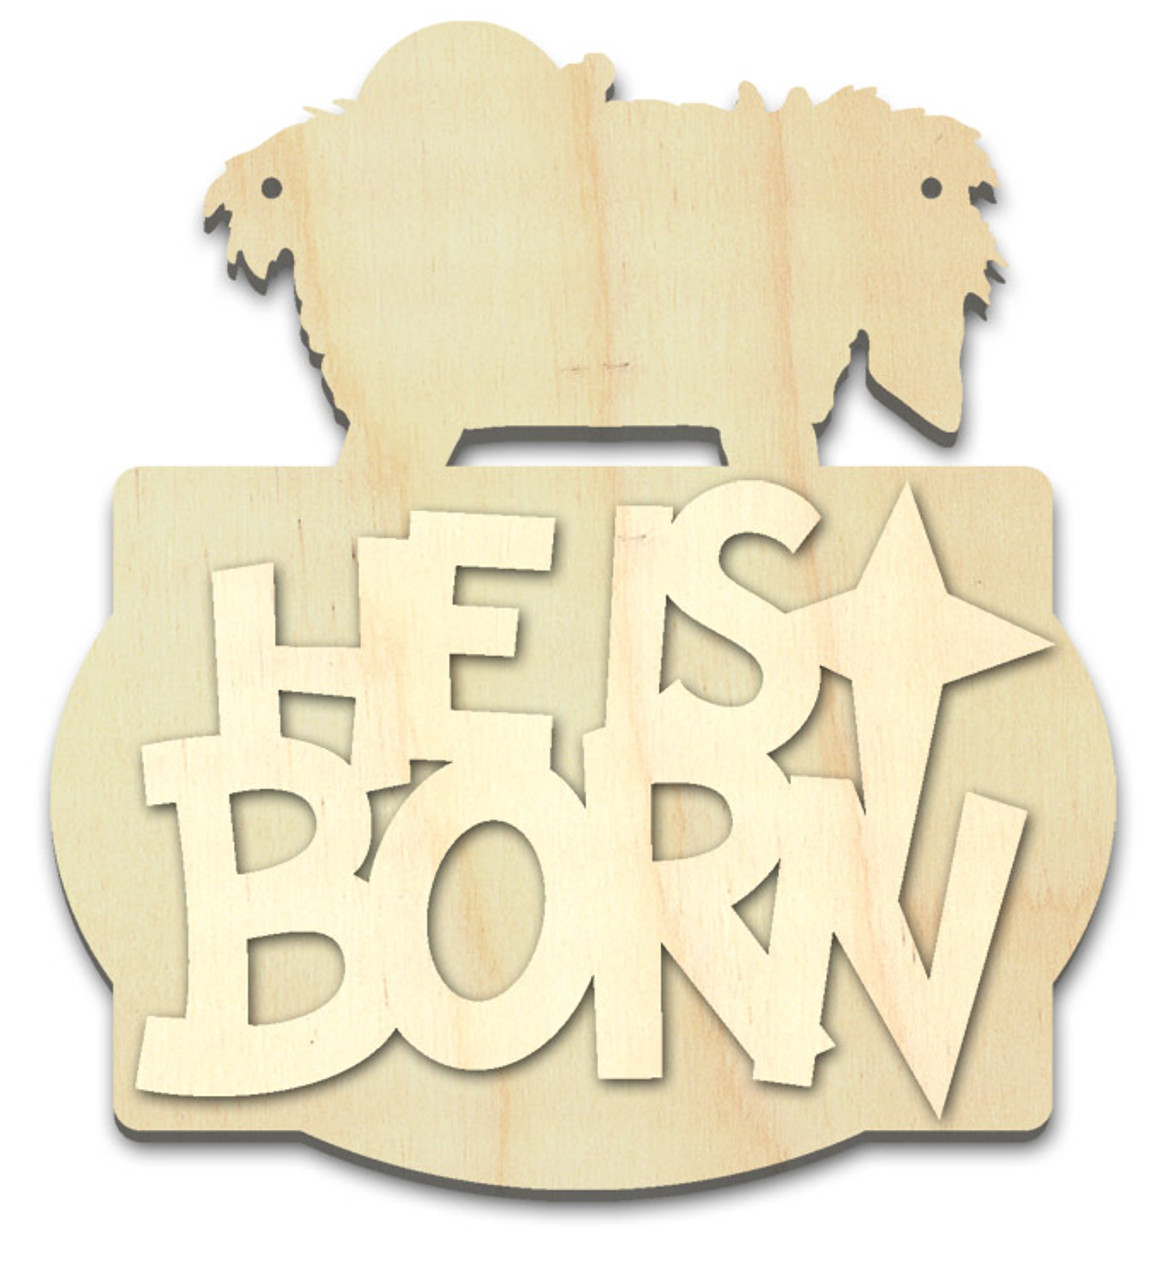 He is Born Multipart Word Surface - Plaque - 9 1/8" x 10"